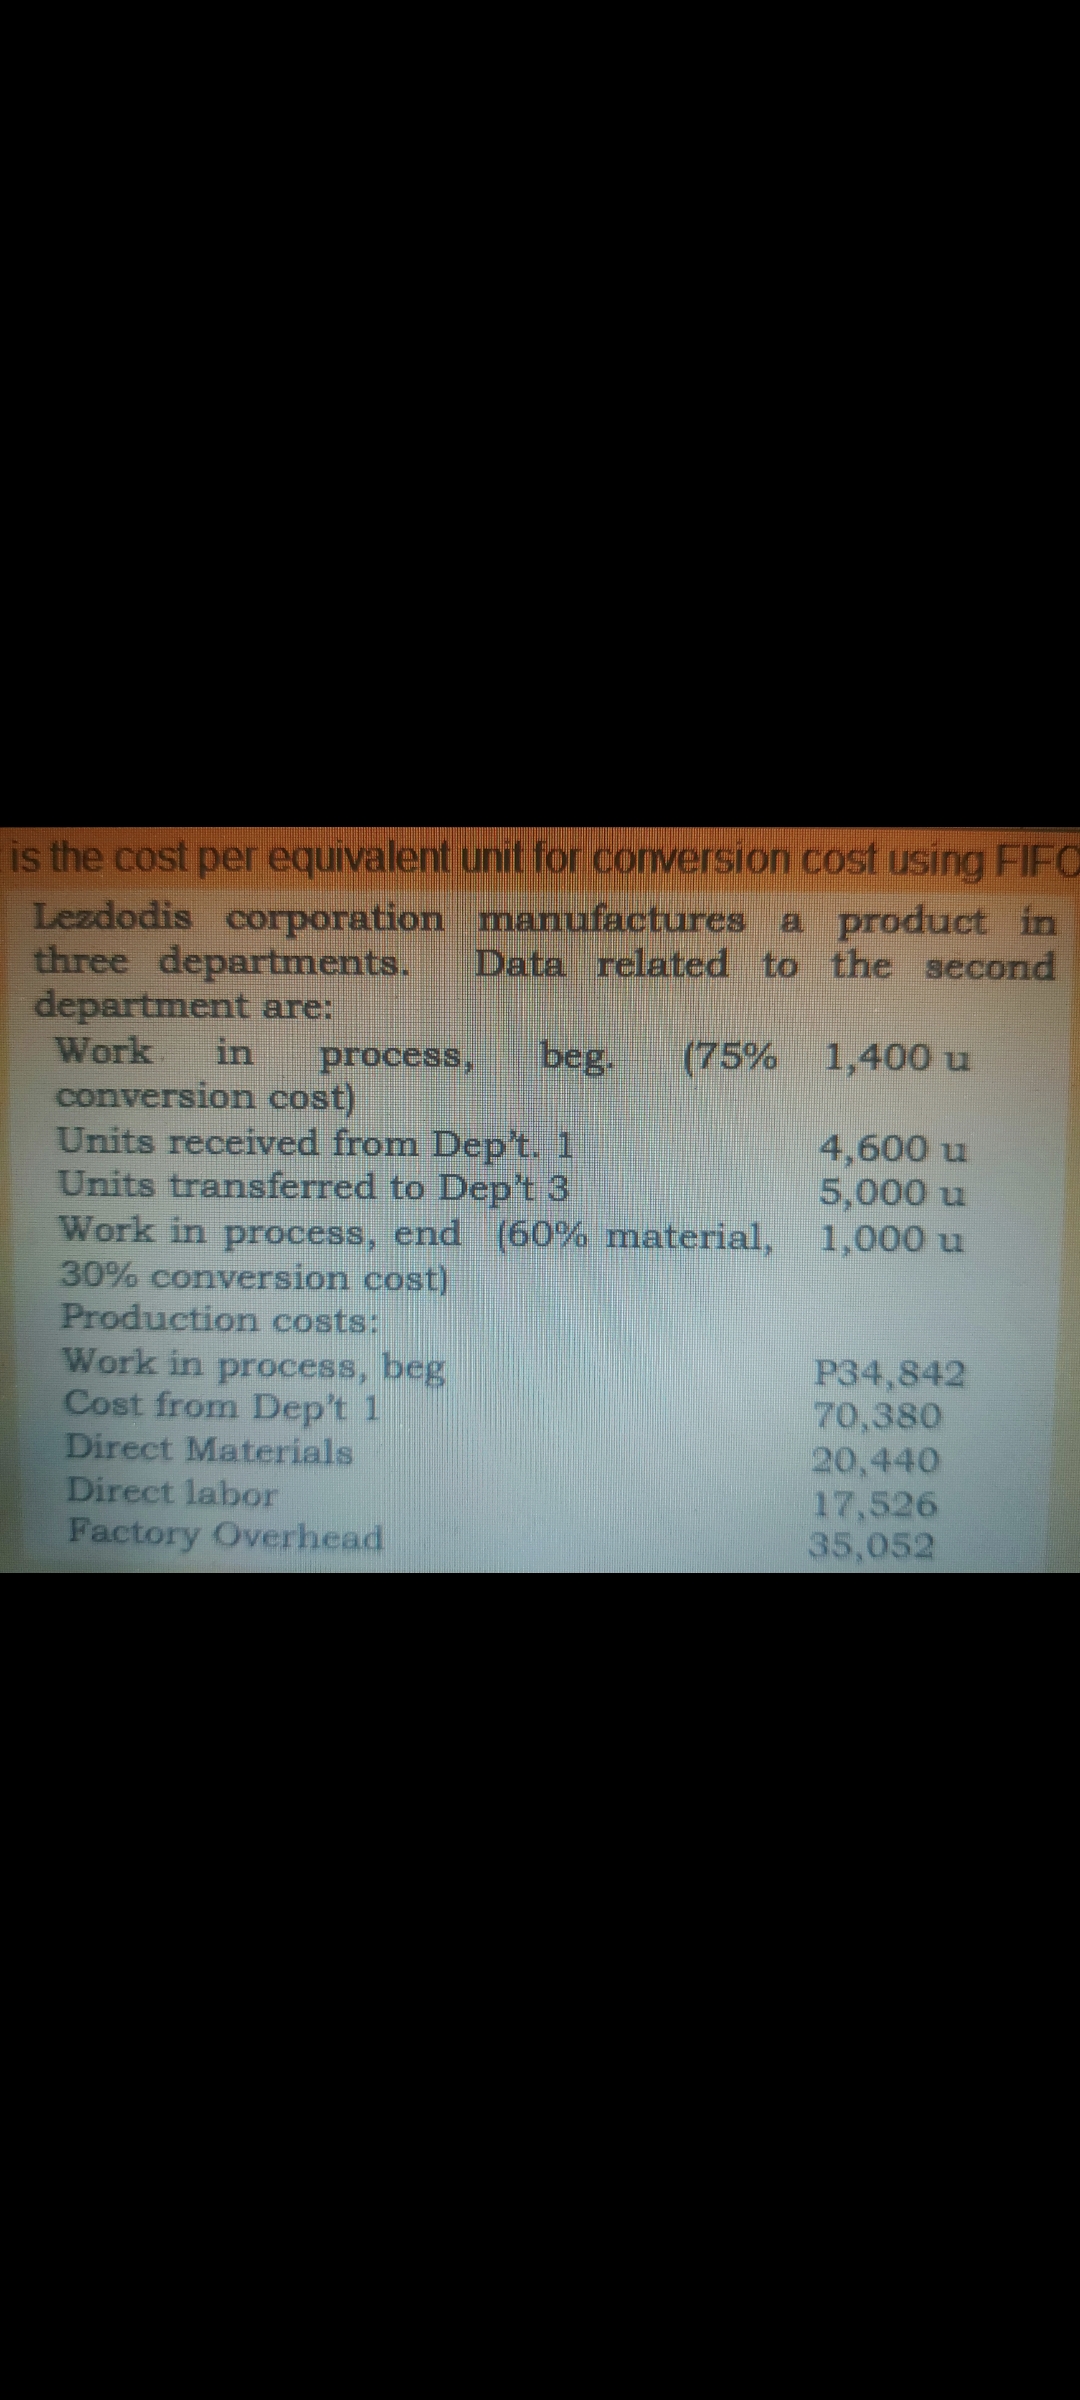 is the cost per equivalent unit for conversion cost using FIFO
Lezdodis corporation manufactures a product in
three departments.
department are:
Work.
Data related to the second
in
process,
beg.
(75% 1,400 u
conversion cost)
Units received from Dep't. 1
Units transferred to Dep't 3
Work in process, end (60% material, 1,000 u
30% conversion cost)
Production costs:
Work in process, beg
Cost from Dep't 1
Direct Materials
Direct labor
Factory Overhead
4,600 u
5,000 u
P34,842
70,380
20,440
17,526
35,052
